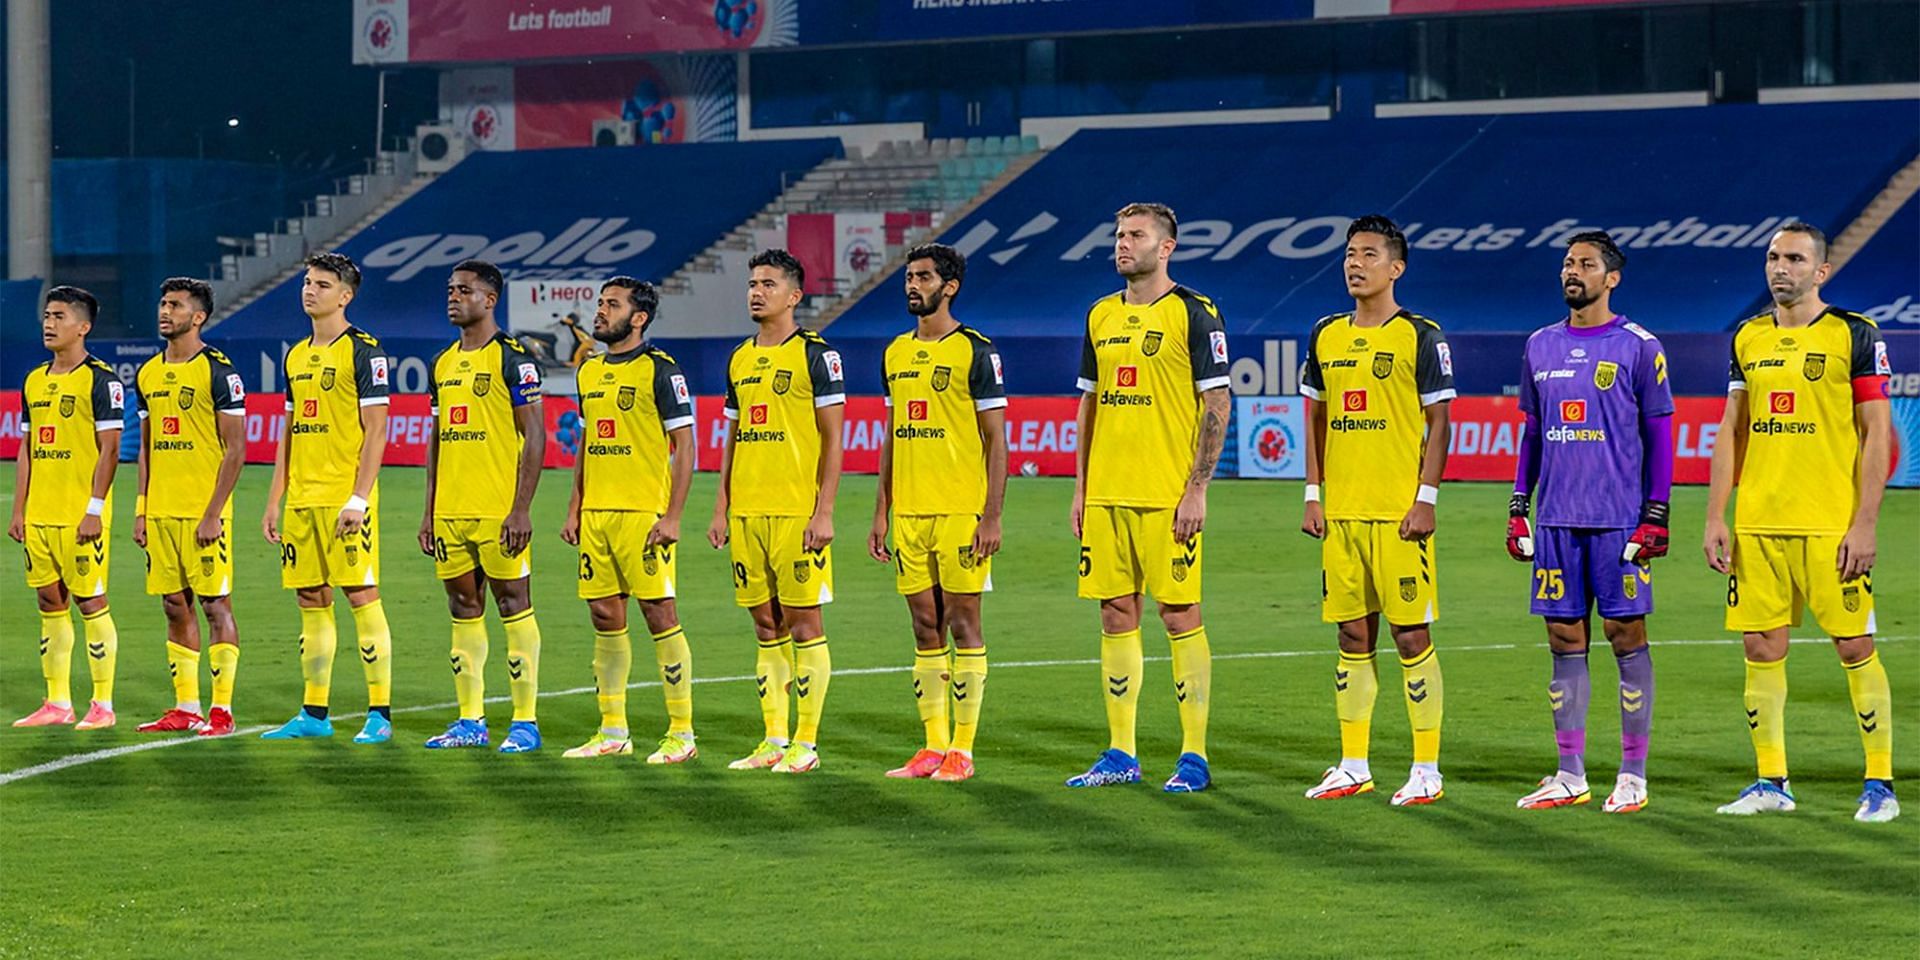 Hyderabad FC are the reigning champions of the Indian Super League.